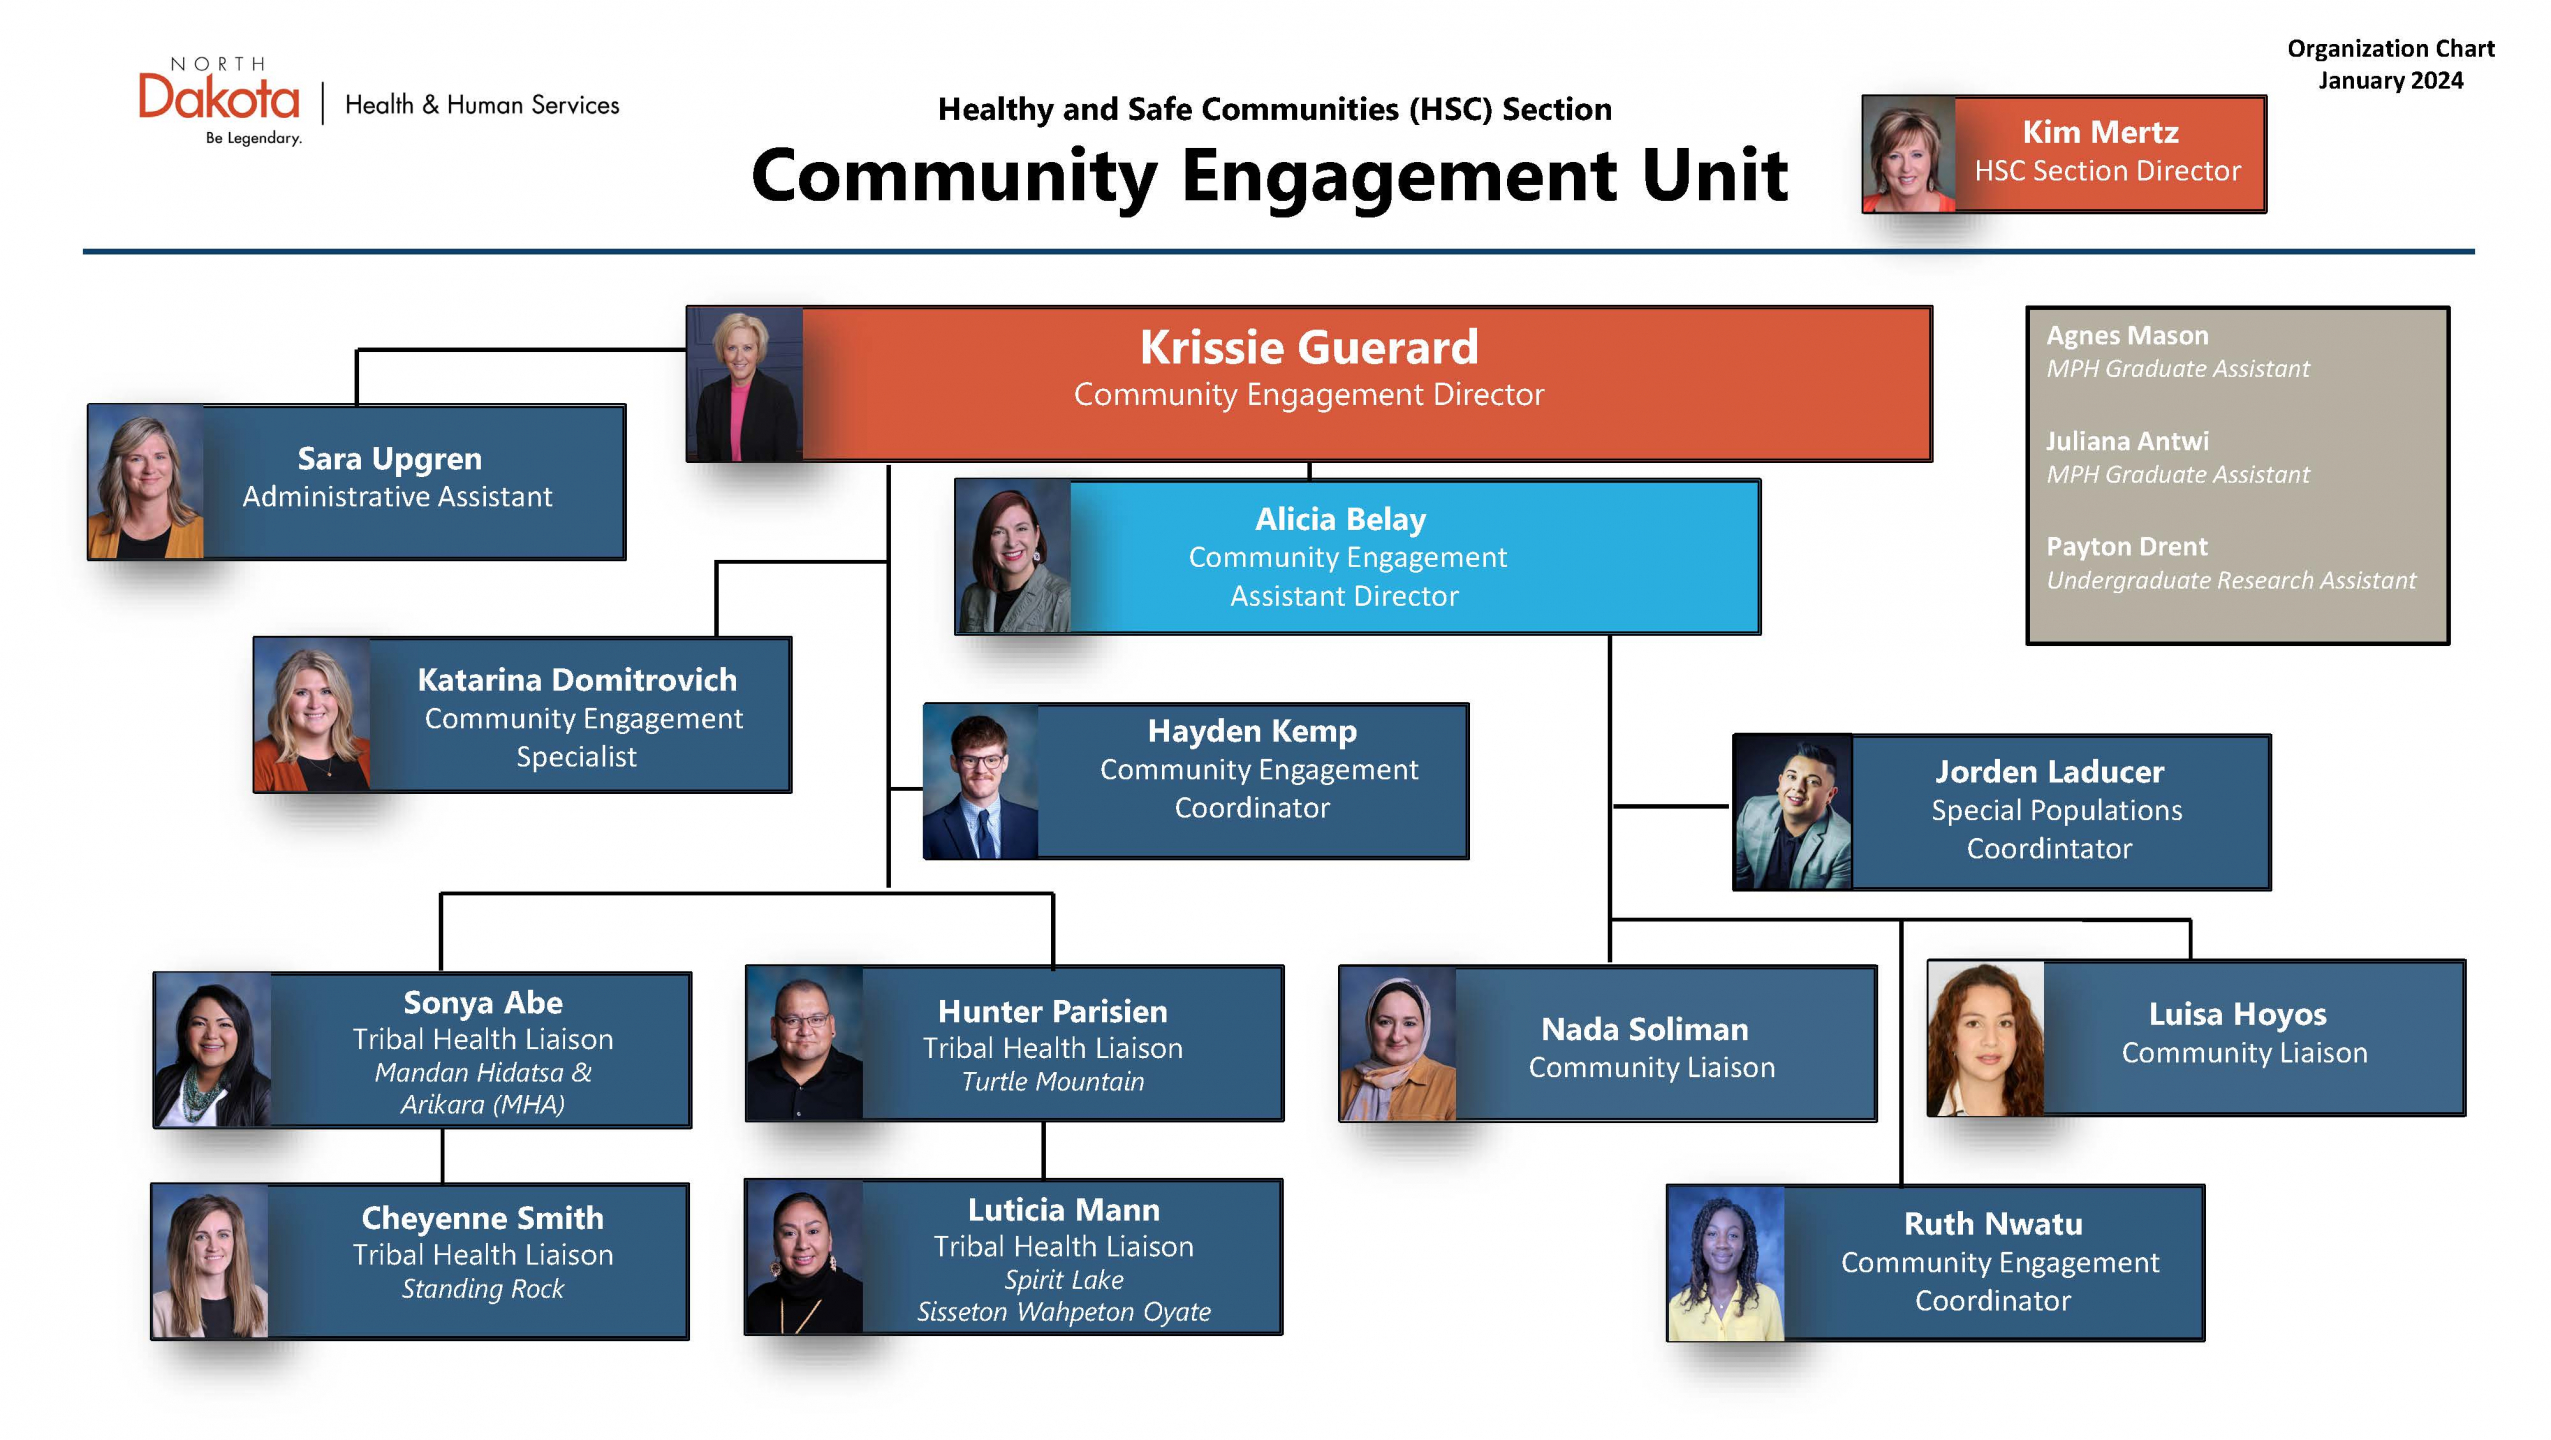 Organization chart for ND HHS Community Engagement Unit with headshots and titles for each team member